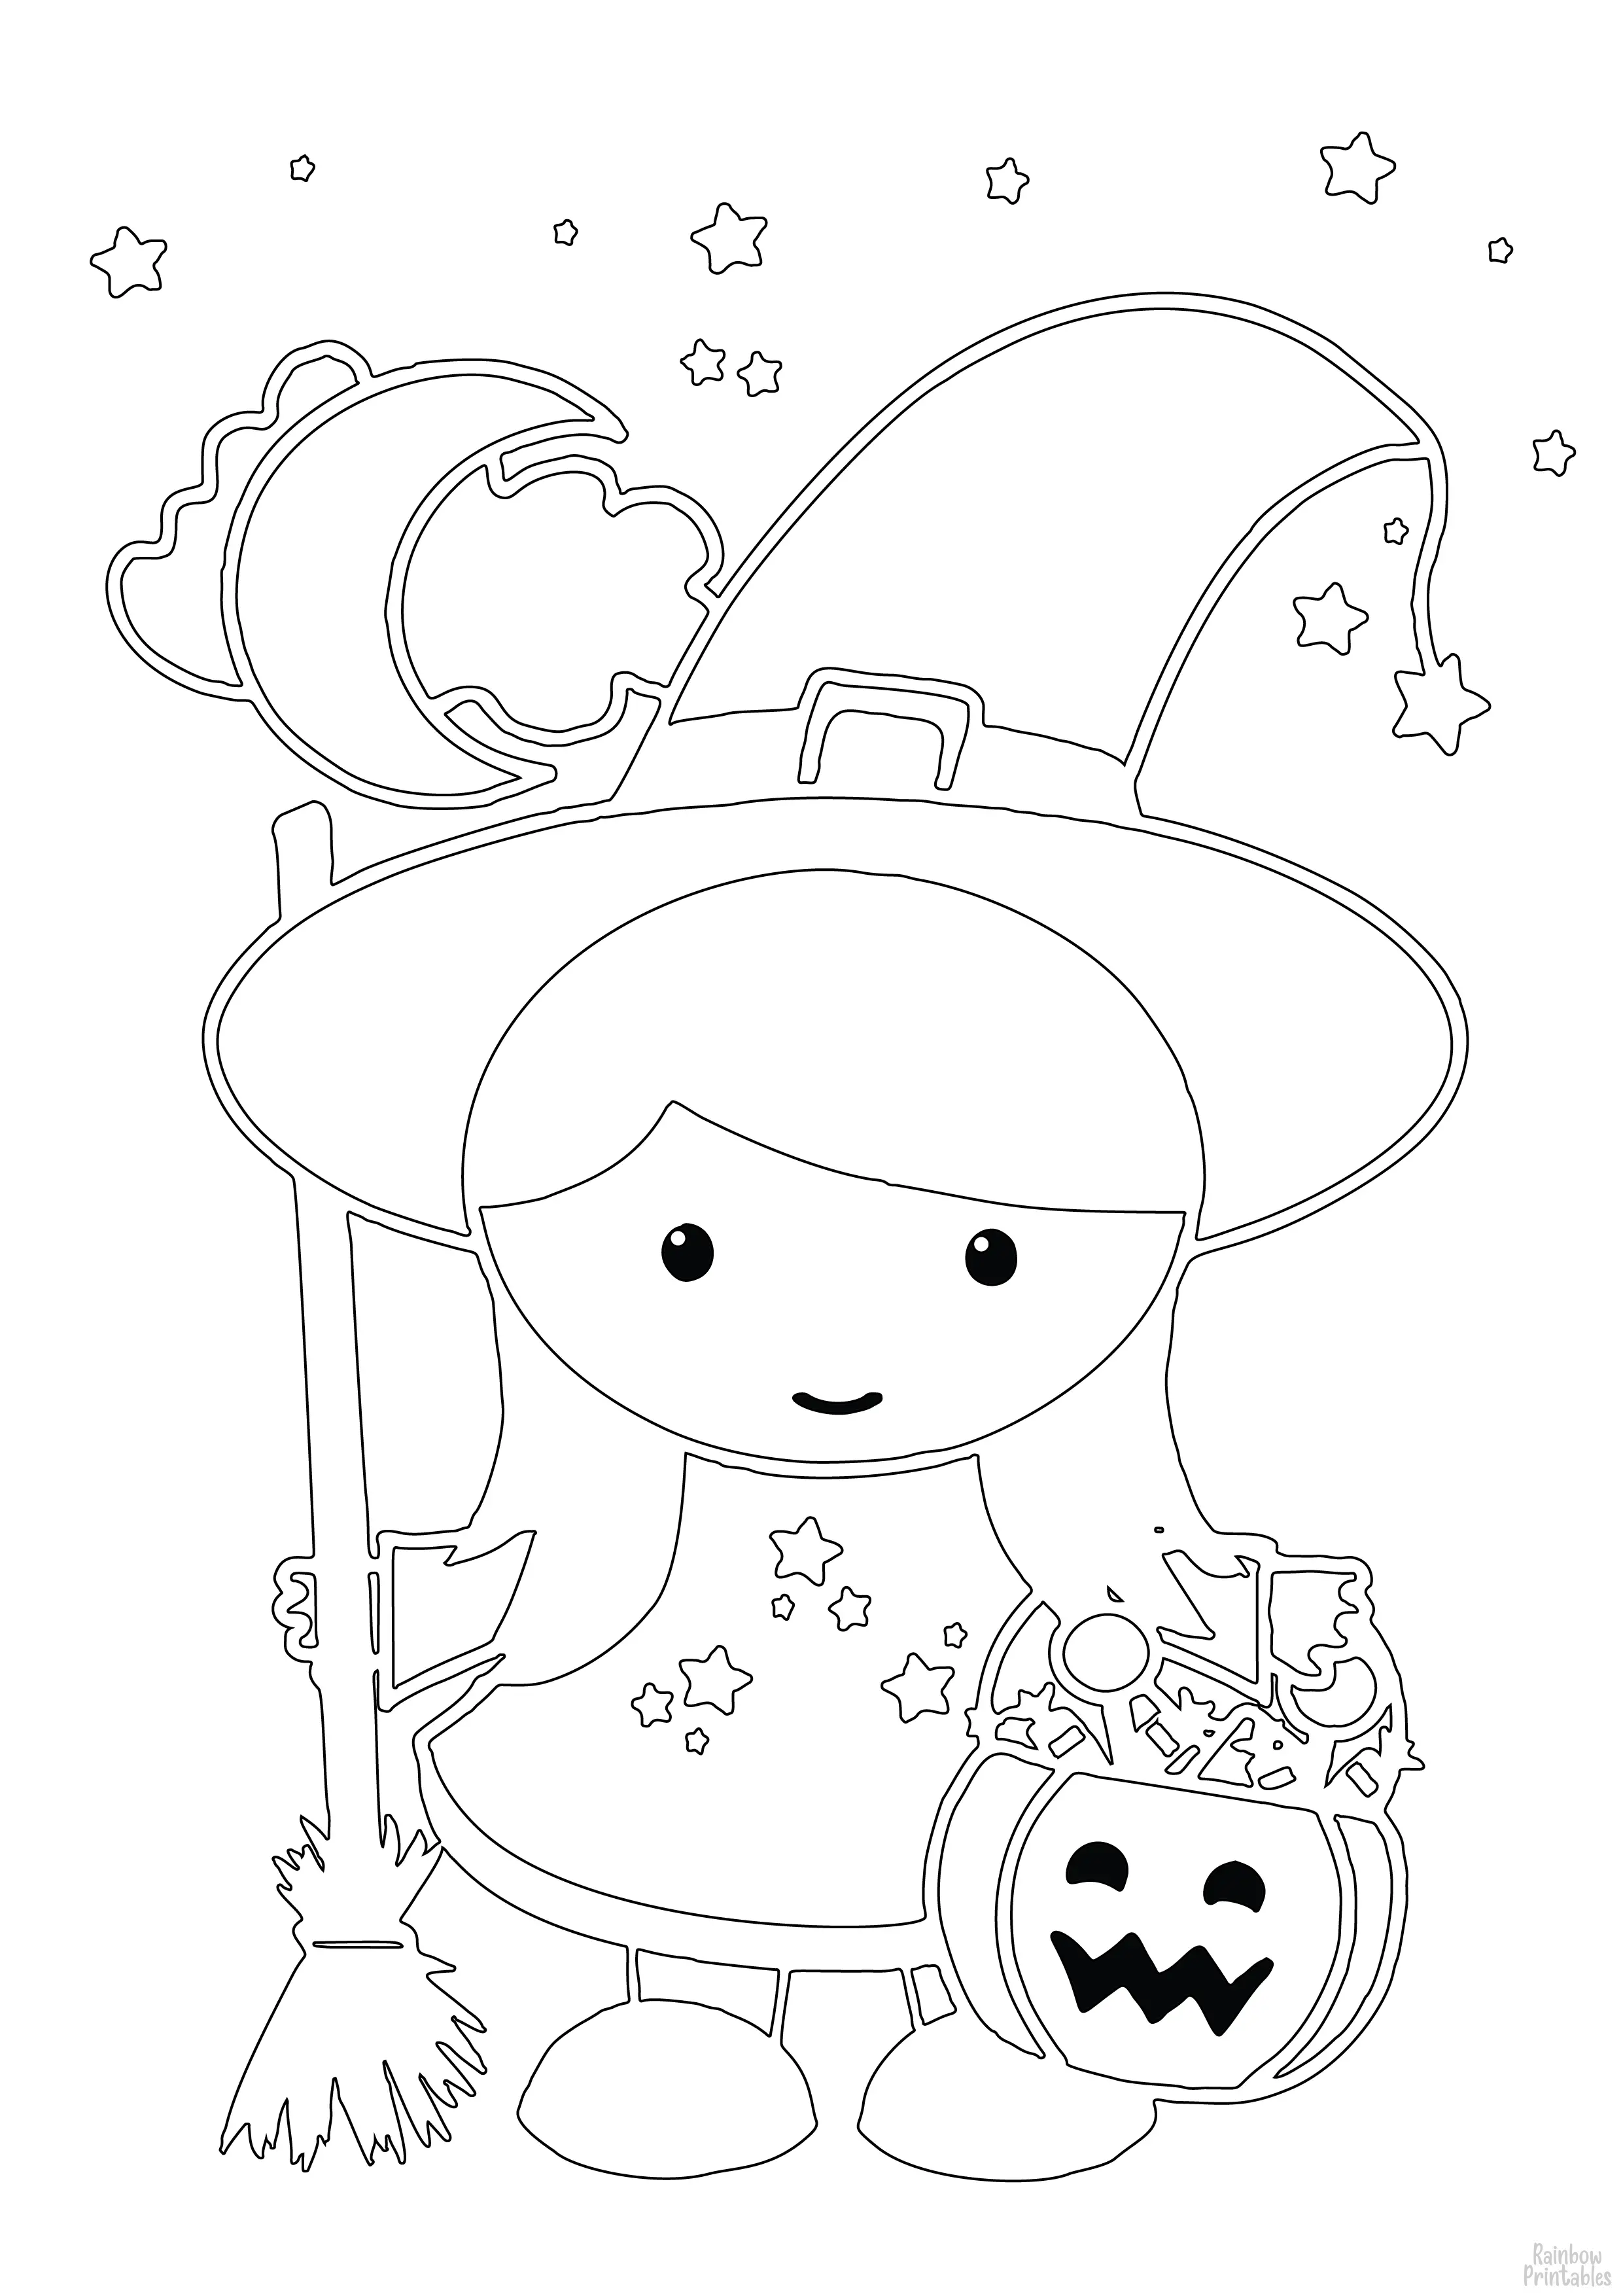 TRICK OR TREAT GIRL CANDY BUCKET Line Art Drawing Set Free Activity Coloring Pages for Kids